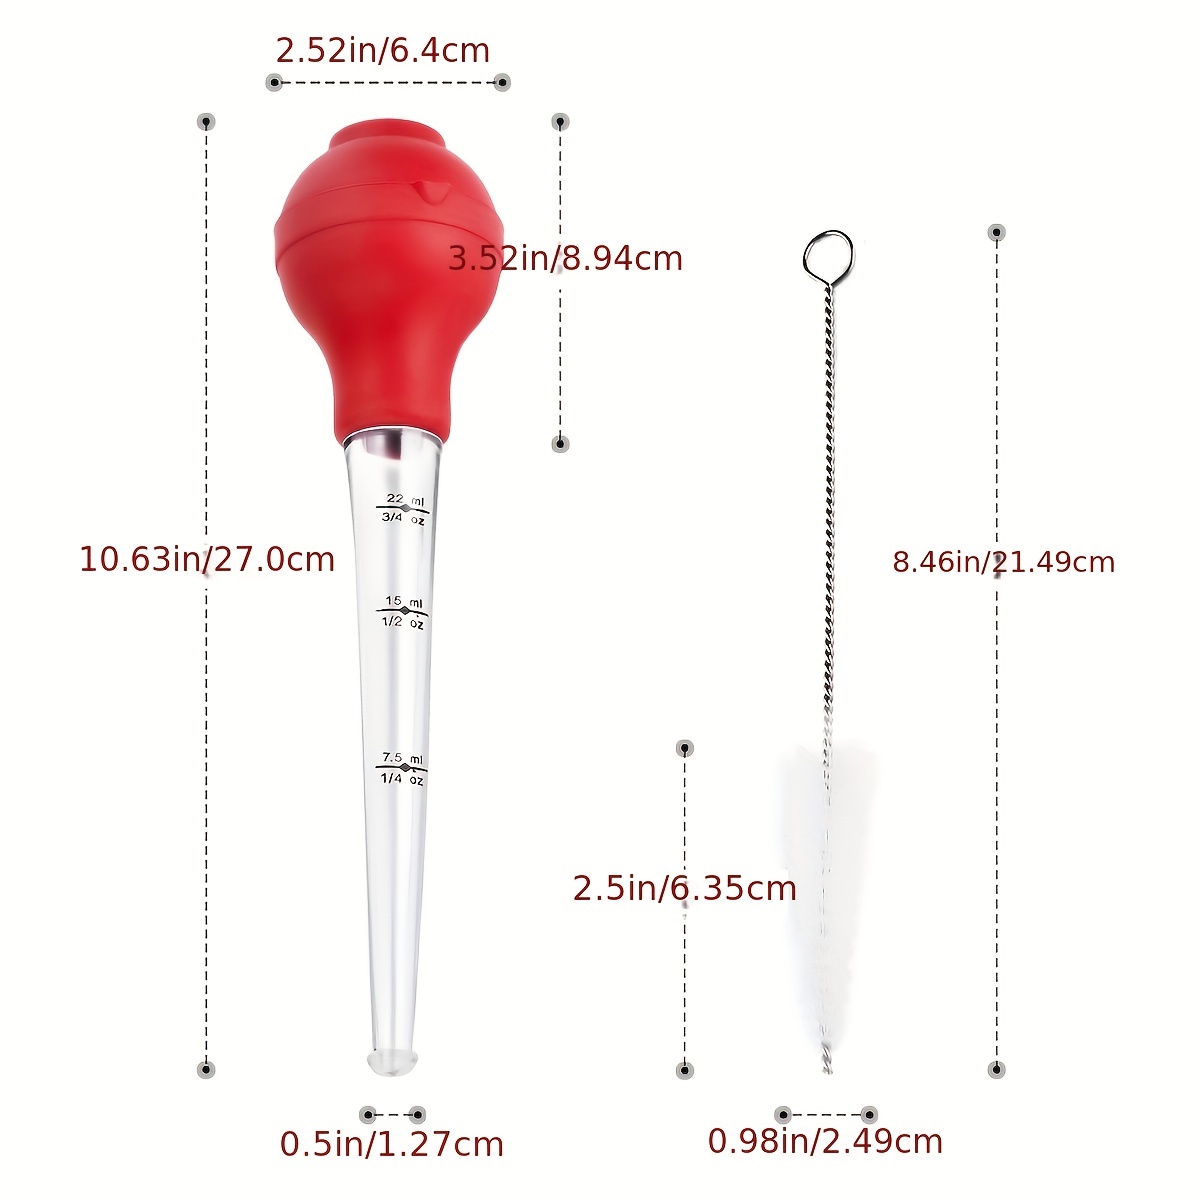 Tasty Turkey Baster Set with Cleaning Brush, Silicone Bulb, Red